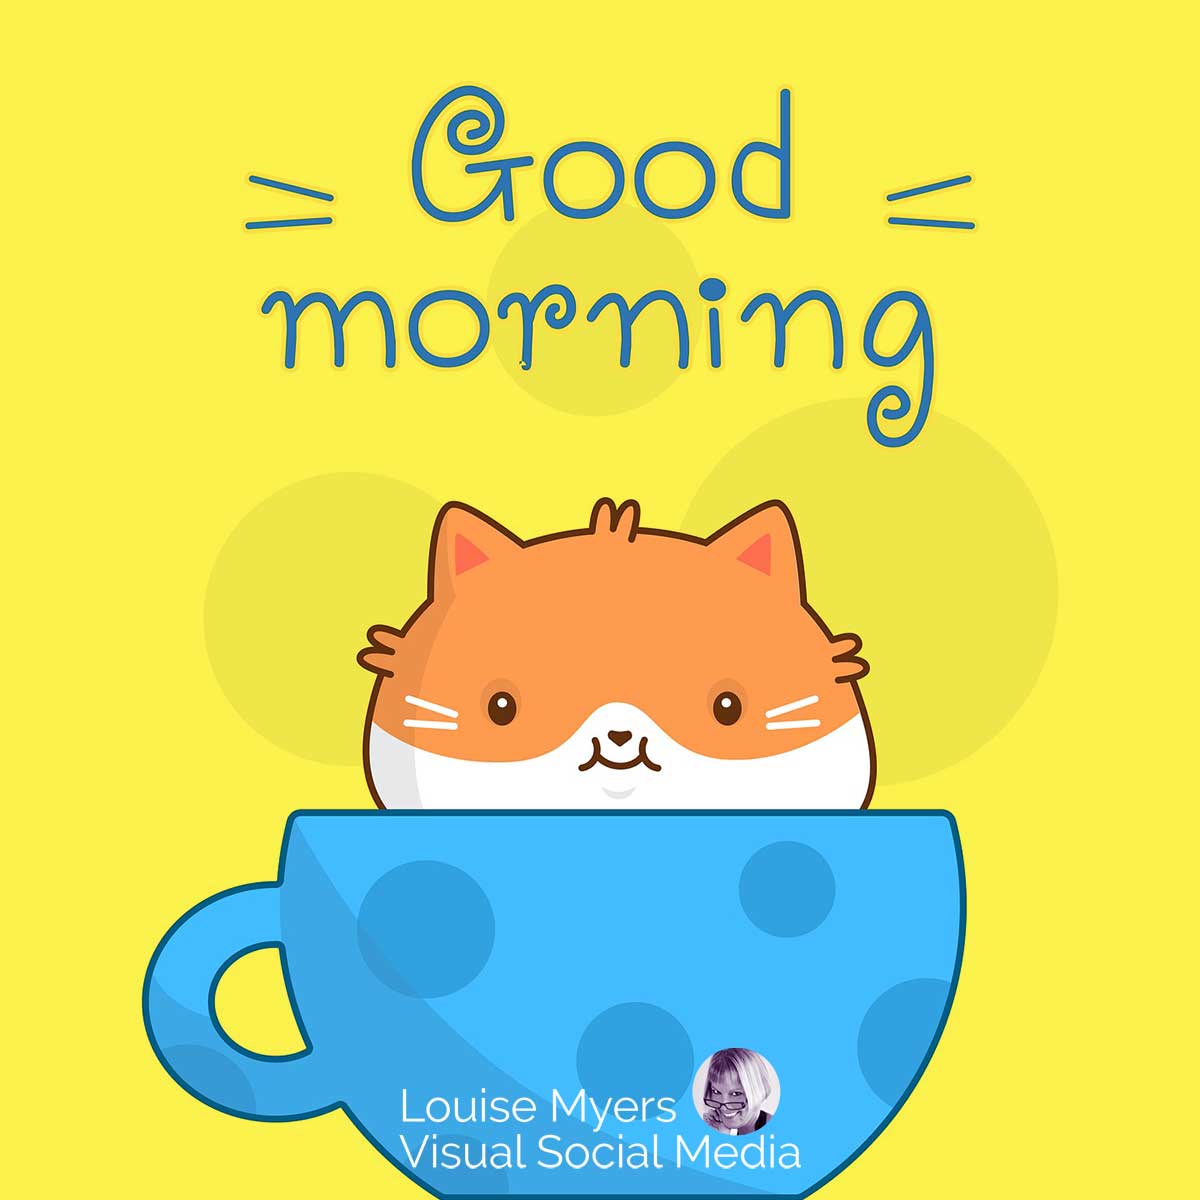 200 Good Morning Quotes to Motivate and Inspire Every Day | LouiseM